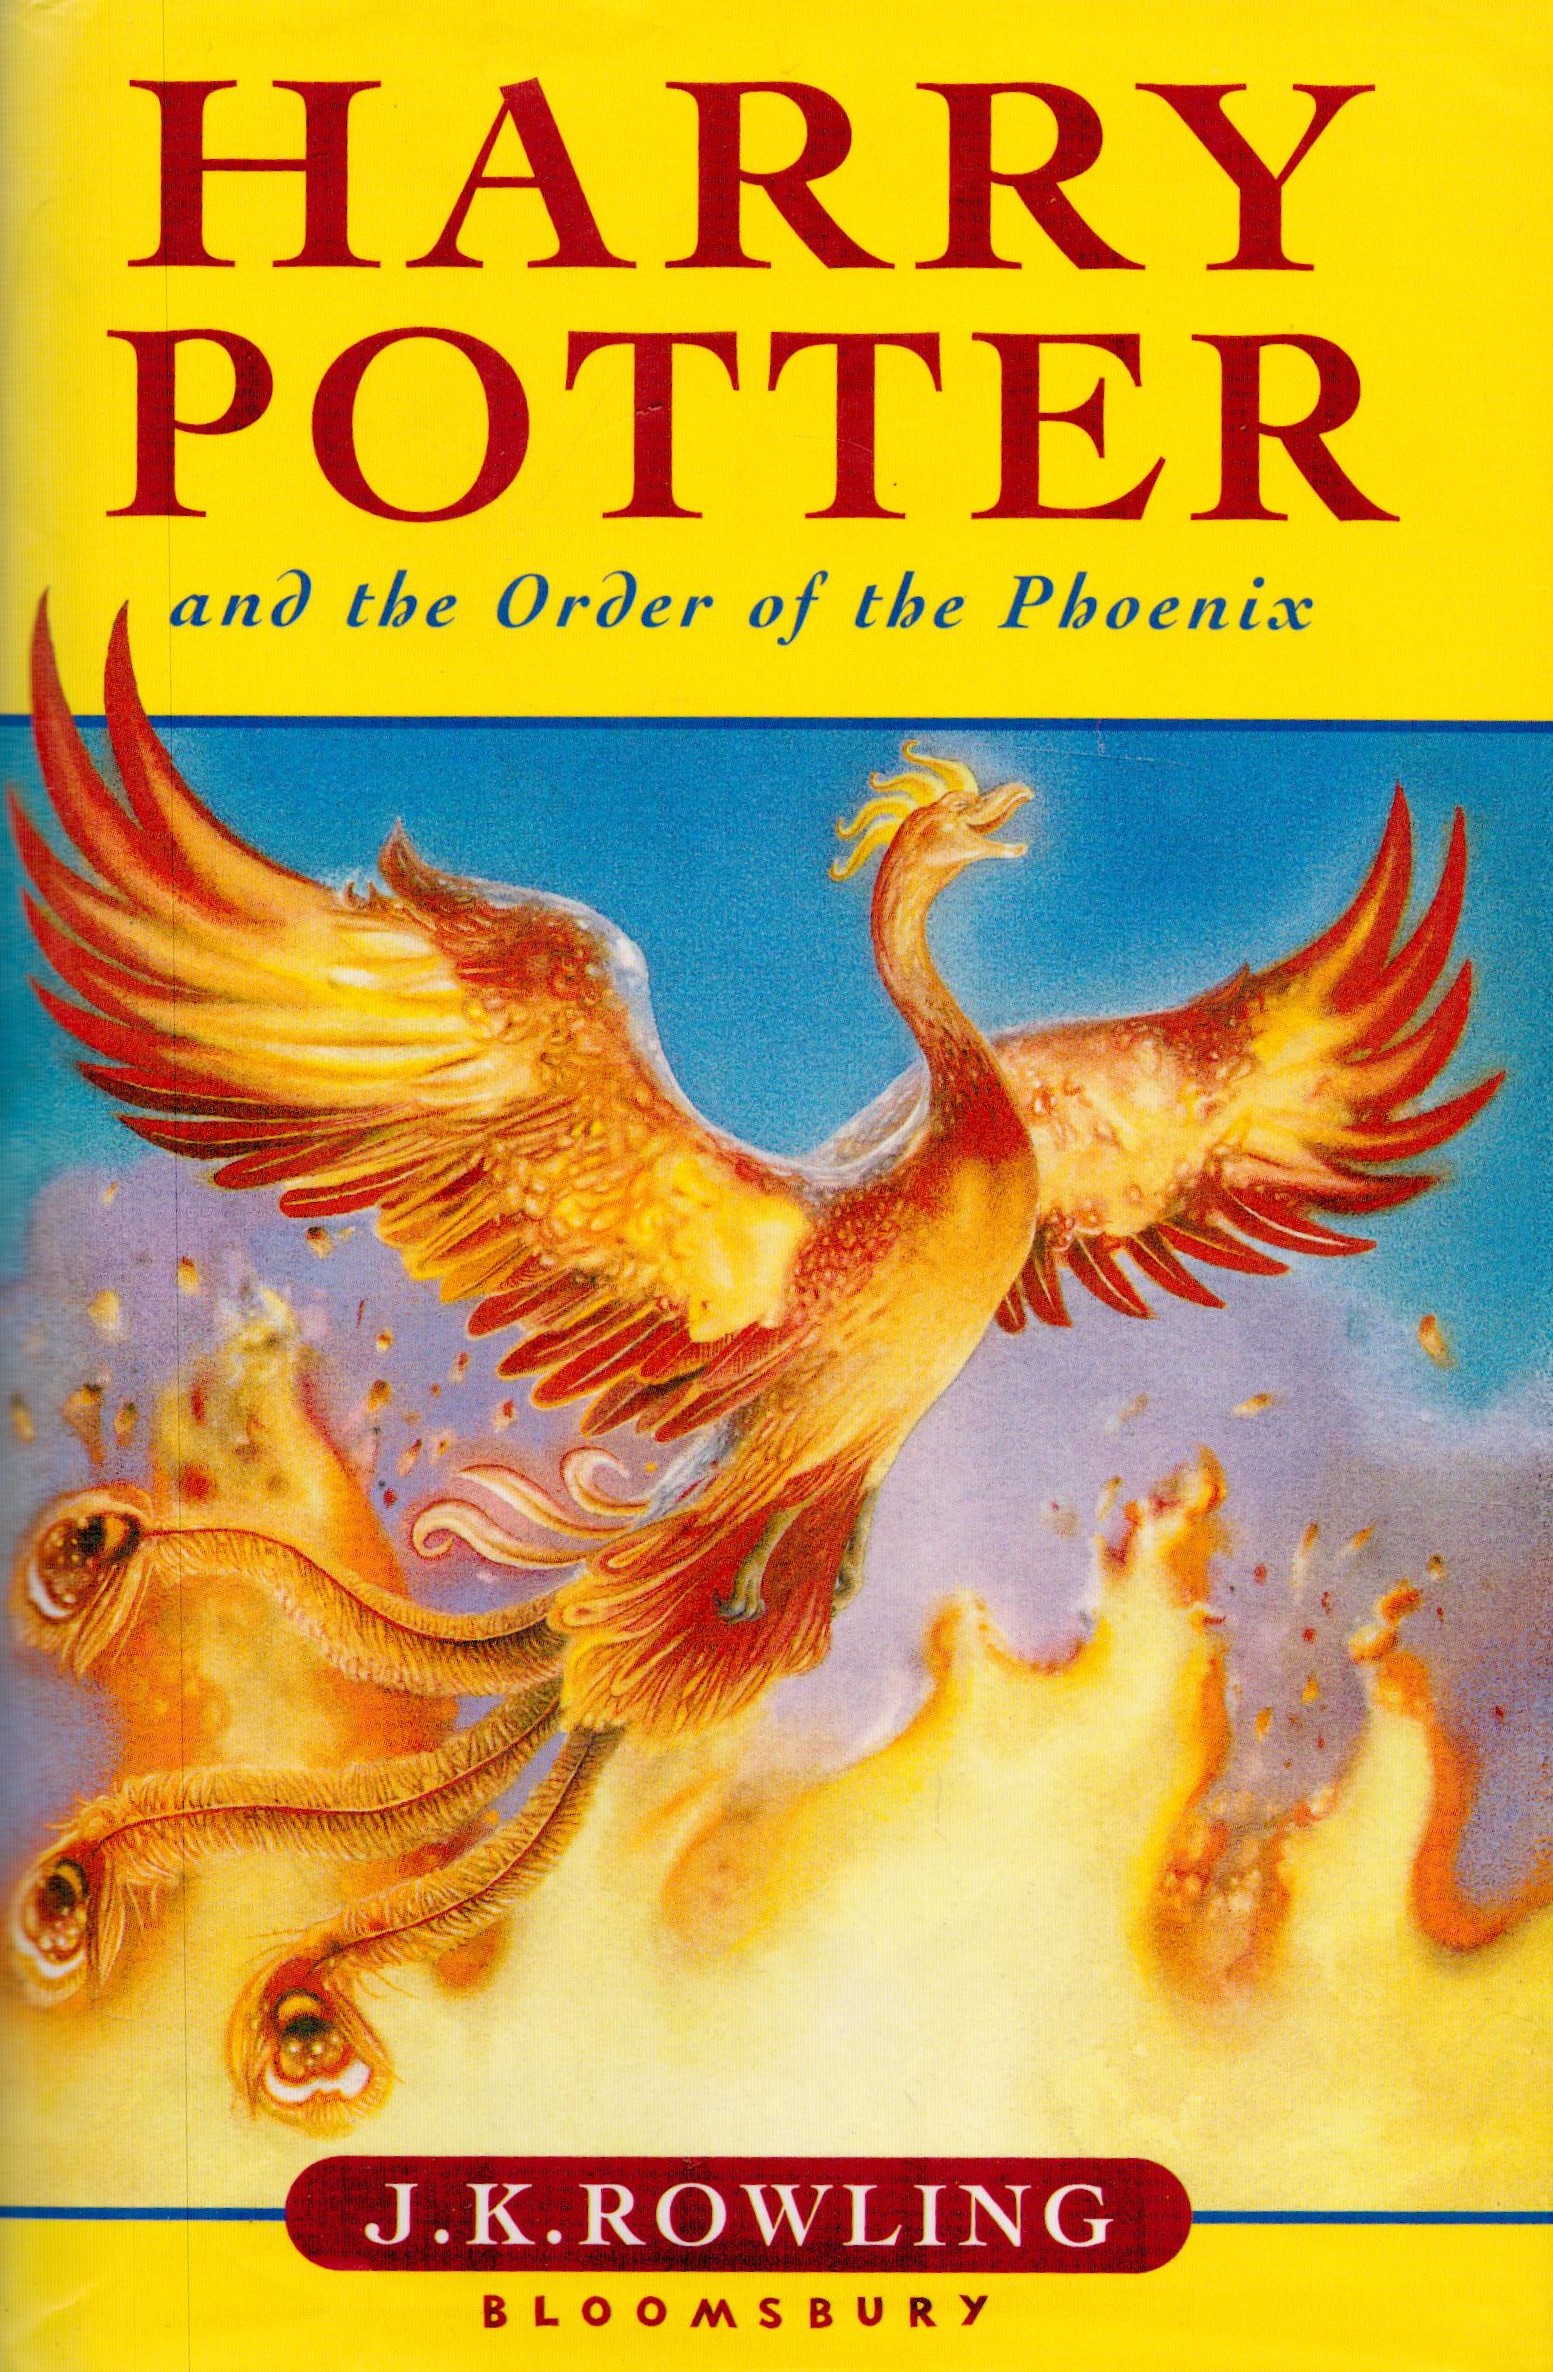 Harry Potter and the Order of The Phoenix by J K Rowling Hardback Book First Edition 2003